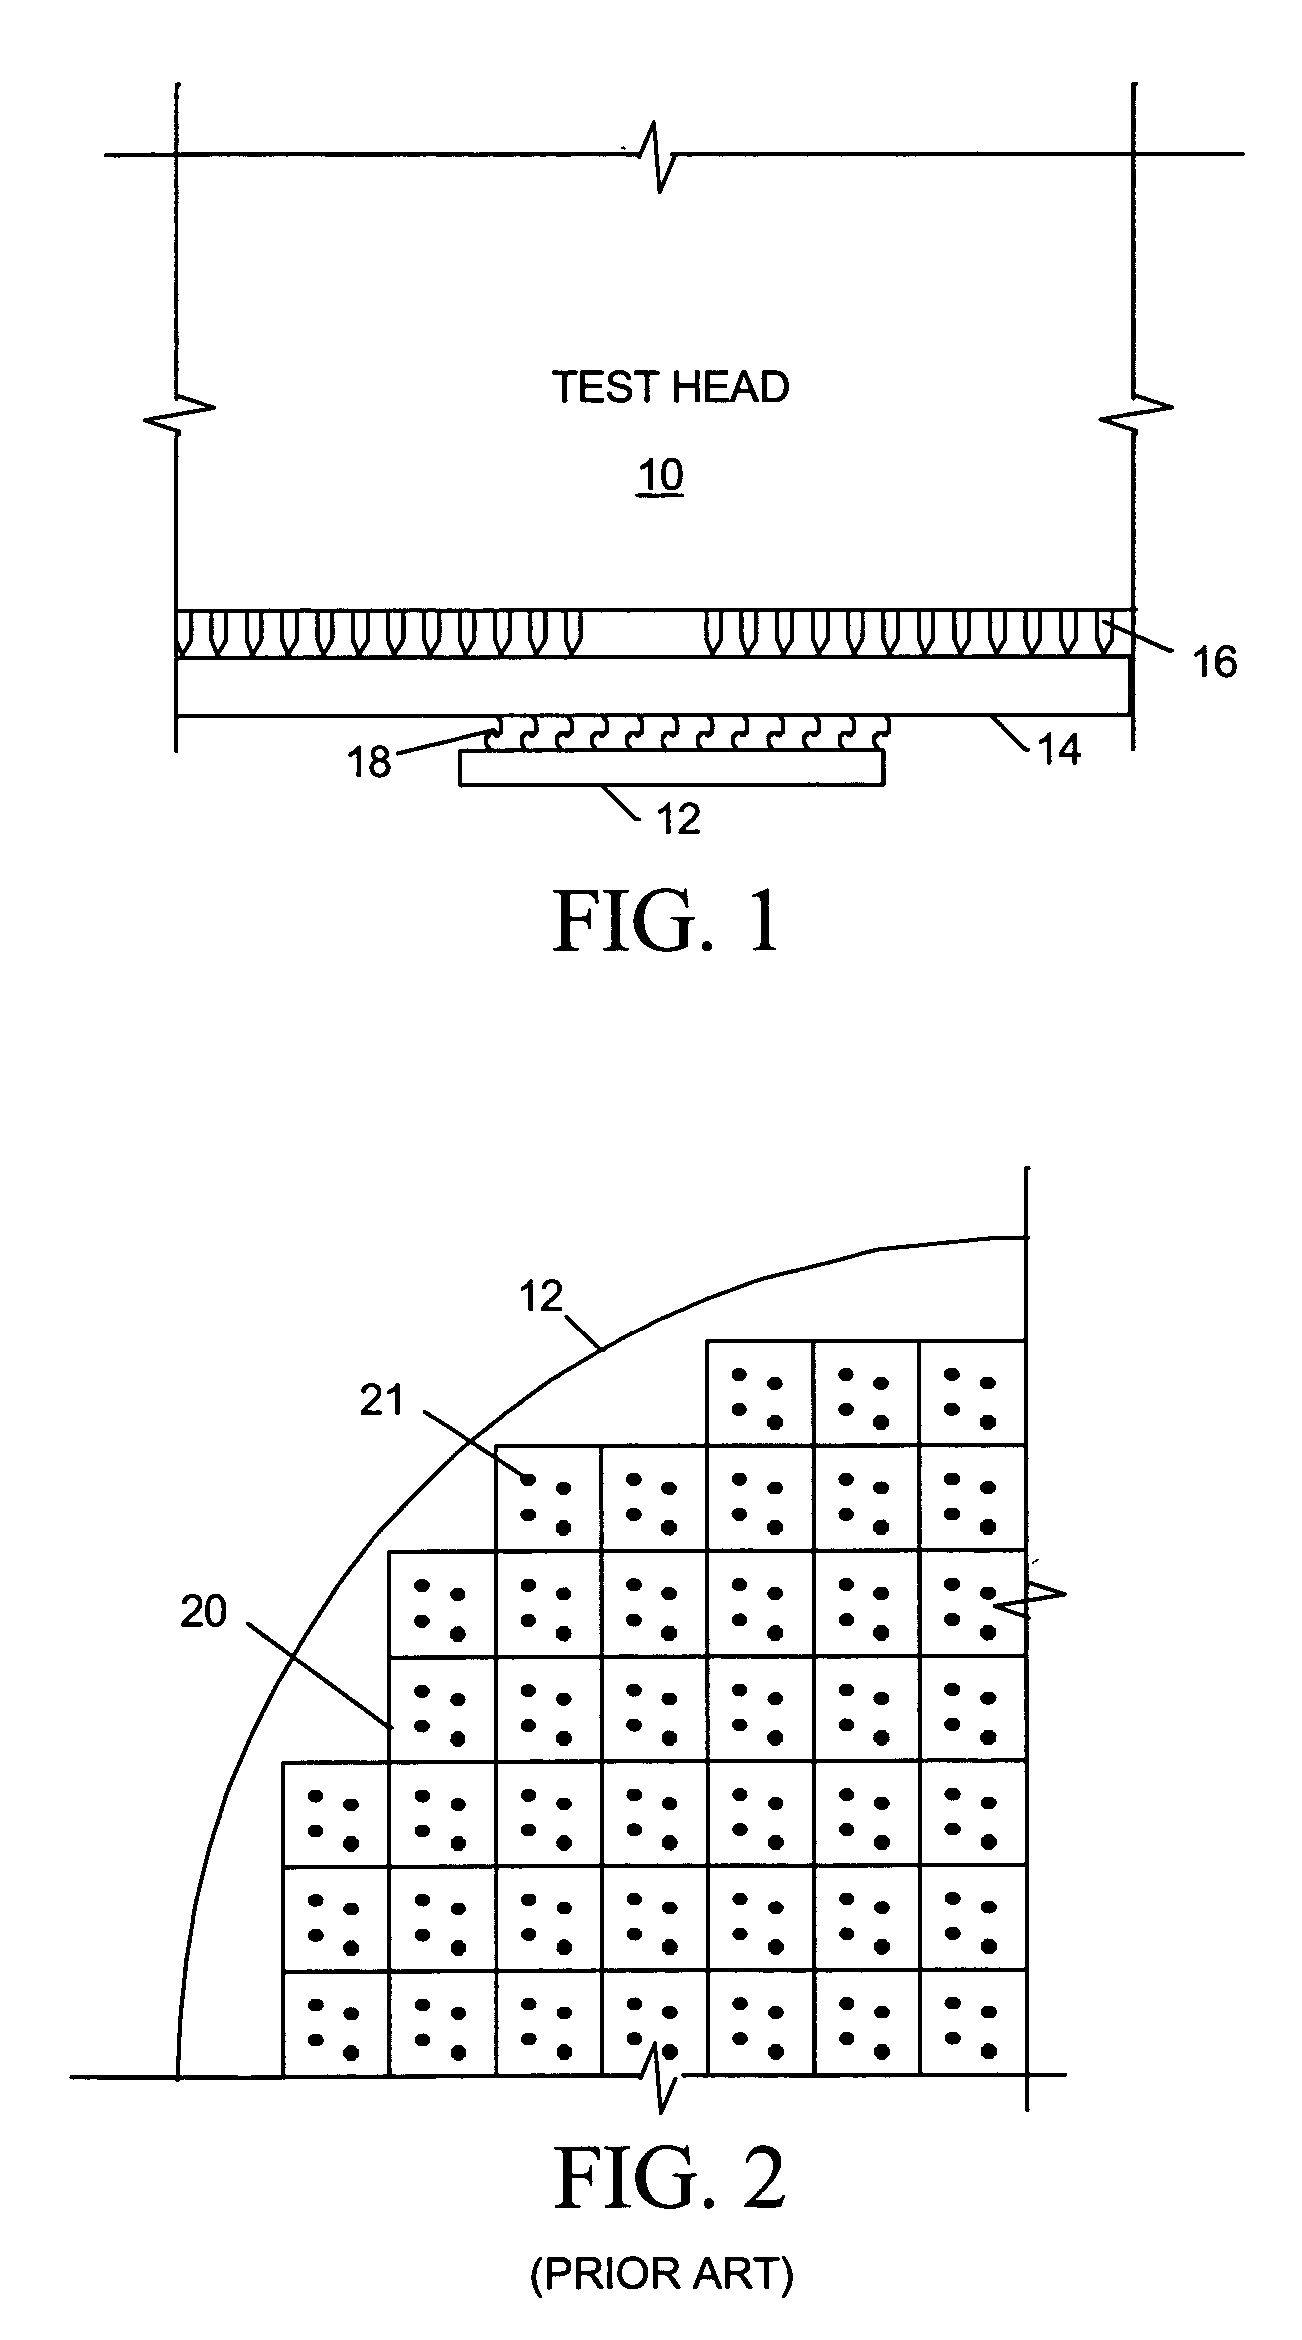 System for measuring signal path resistance for an integrated circuit tester interconnect structure